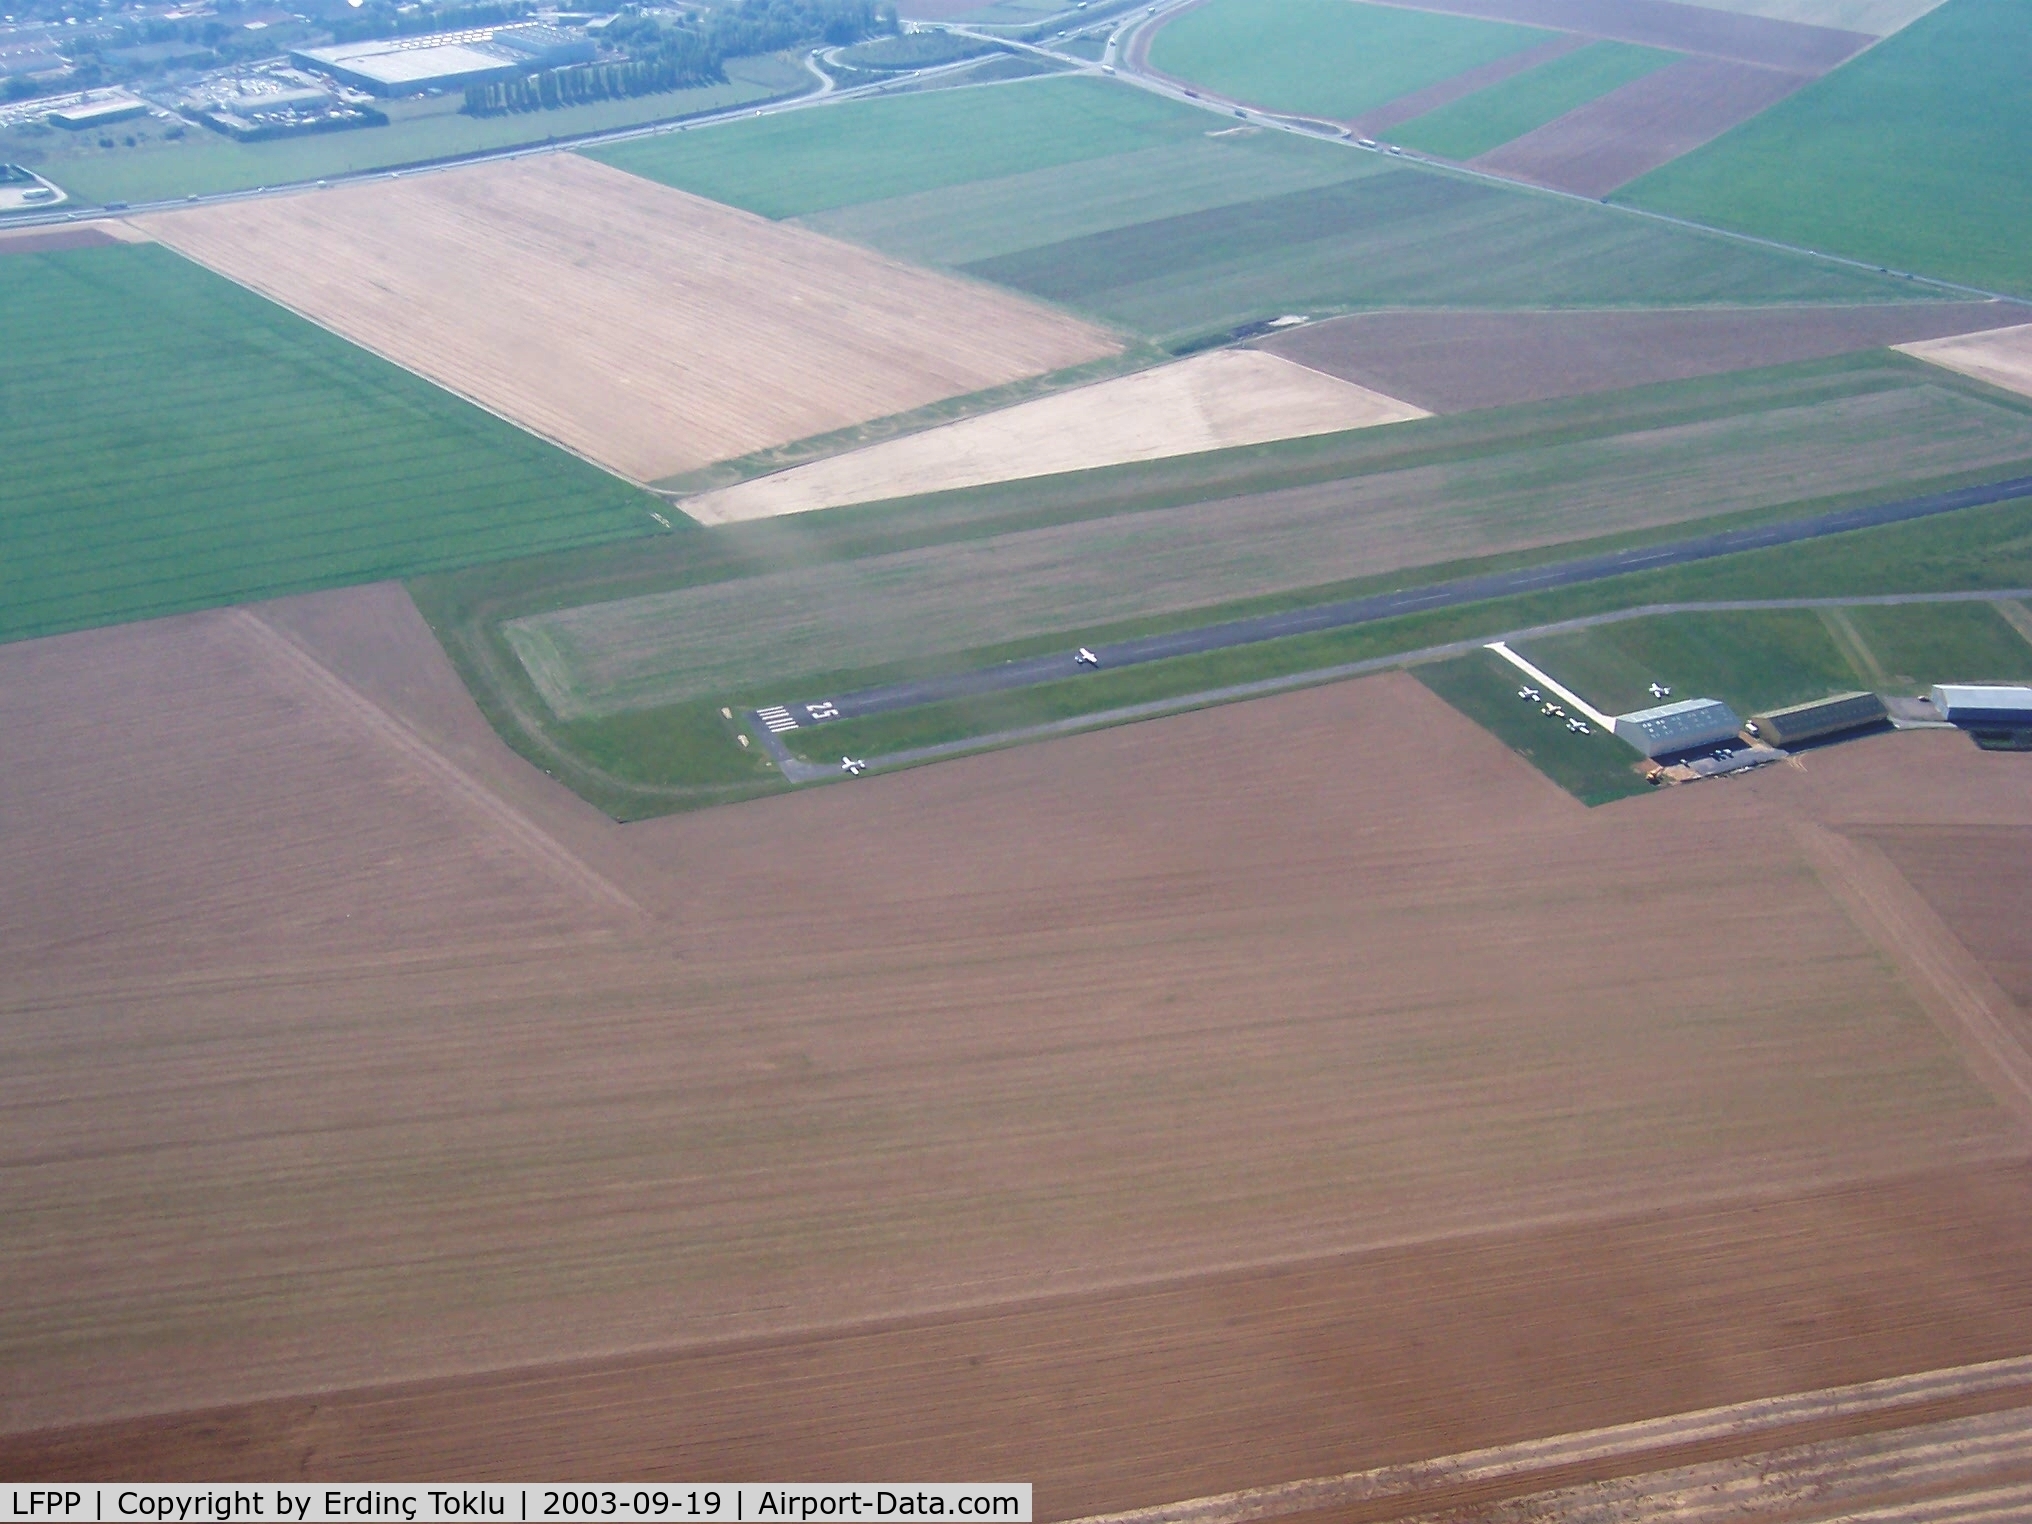 Le Plessis-Belleville Airport, Le Plessis-Belleville France (LFPP) - Plessis-Bellevile Rwy 25 seen from the north flying towards Pontoise